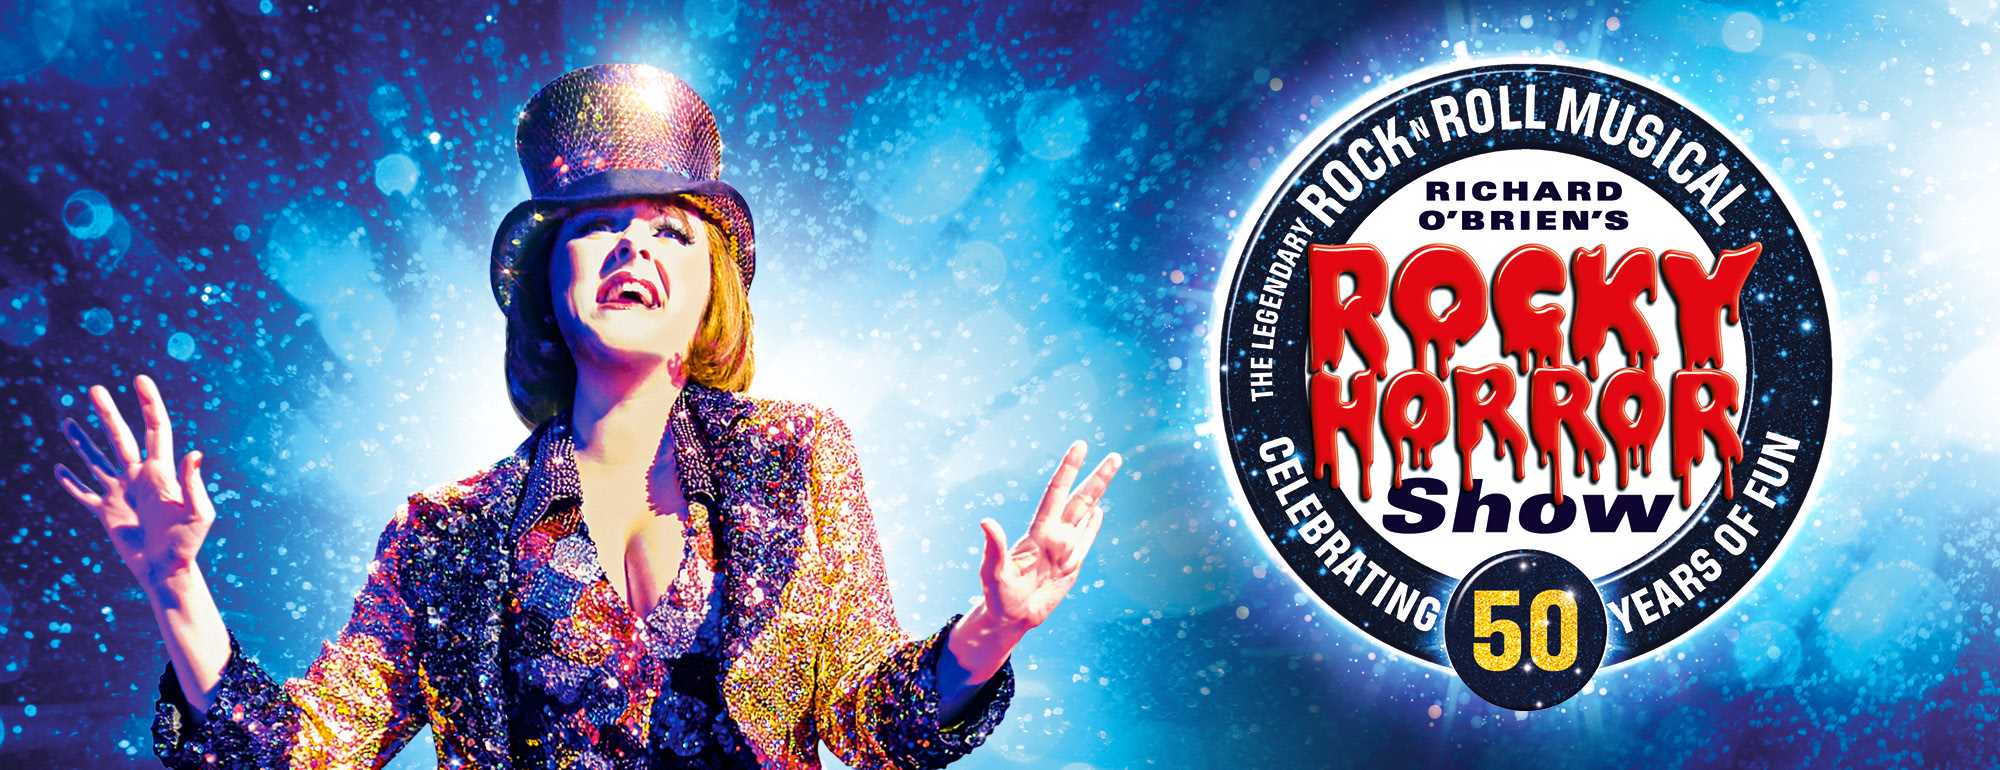 Rocky Horror 50th anniversary tour image